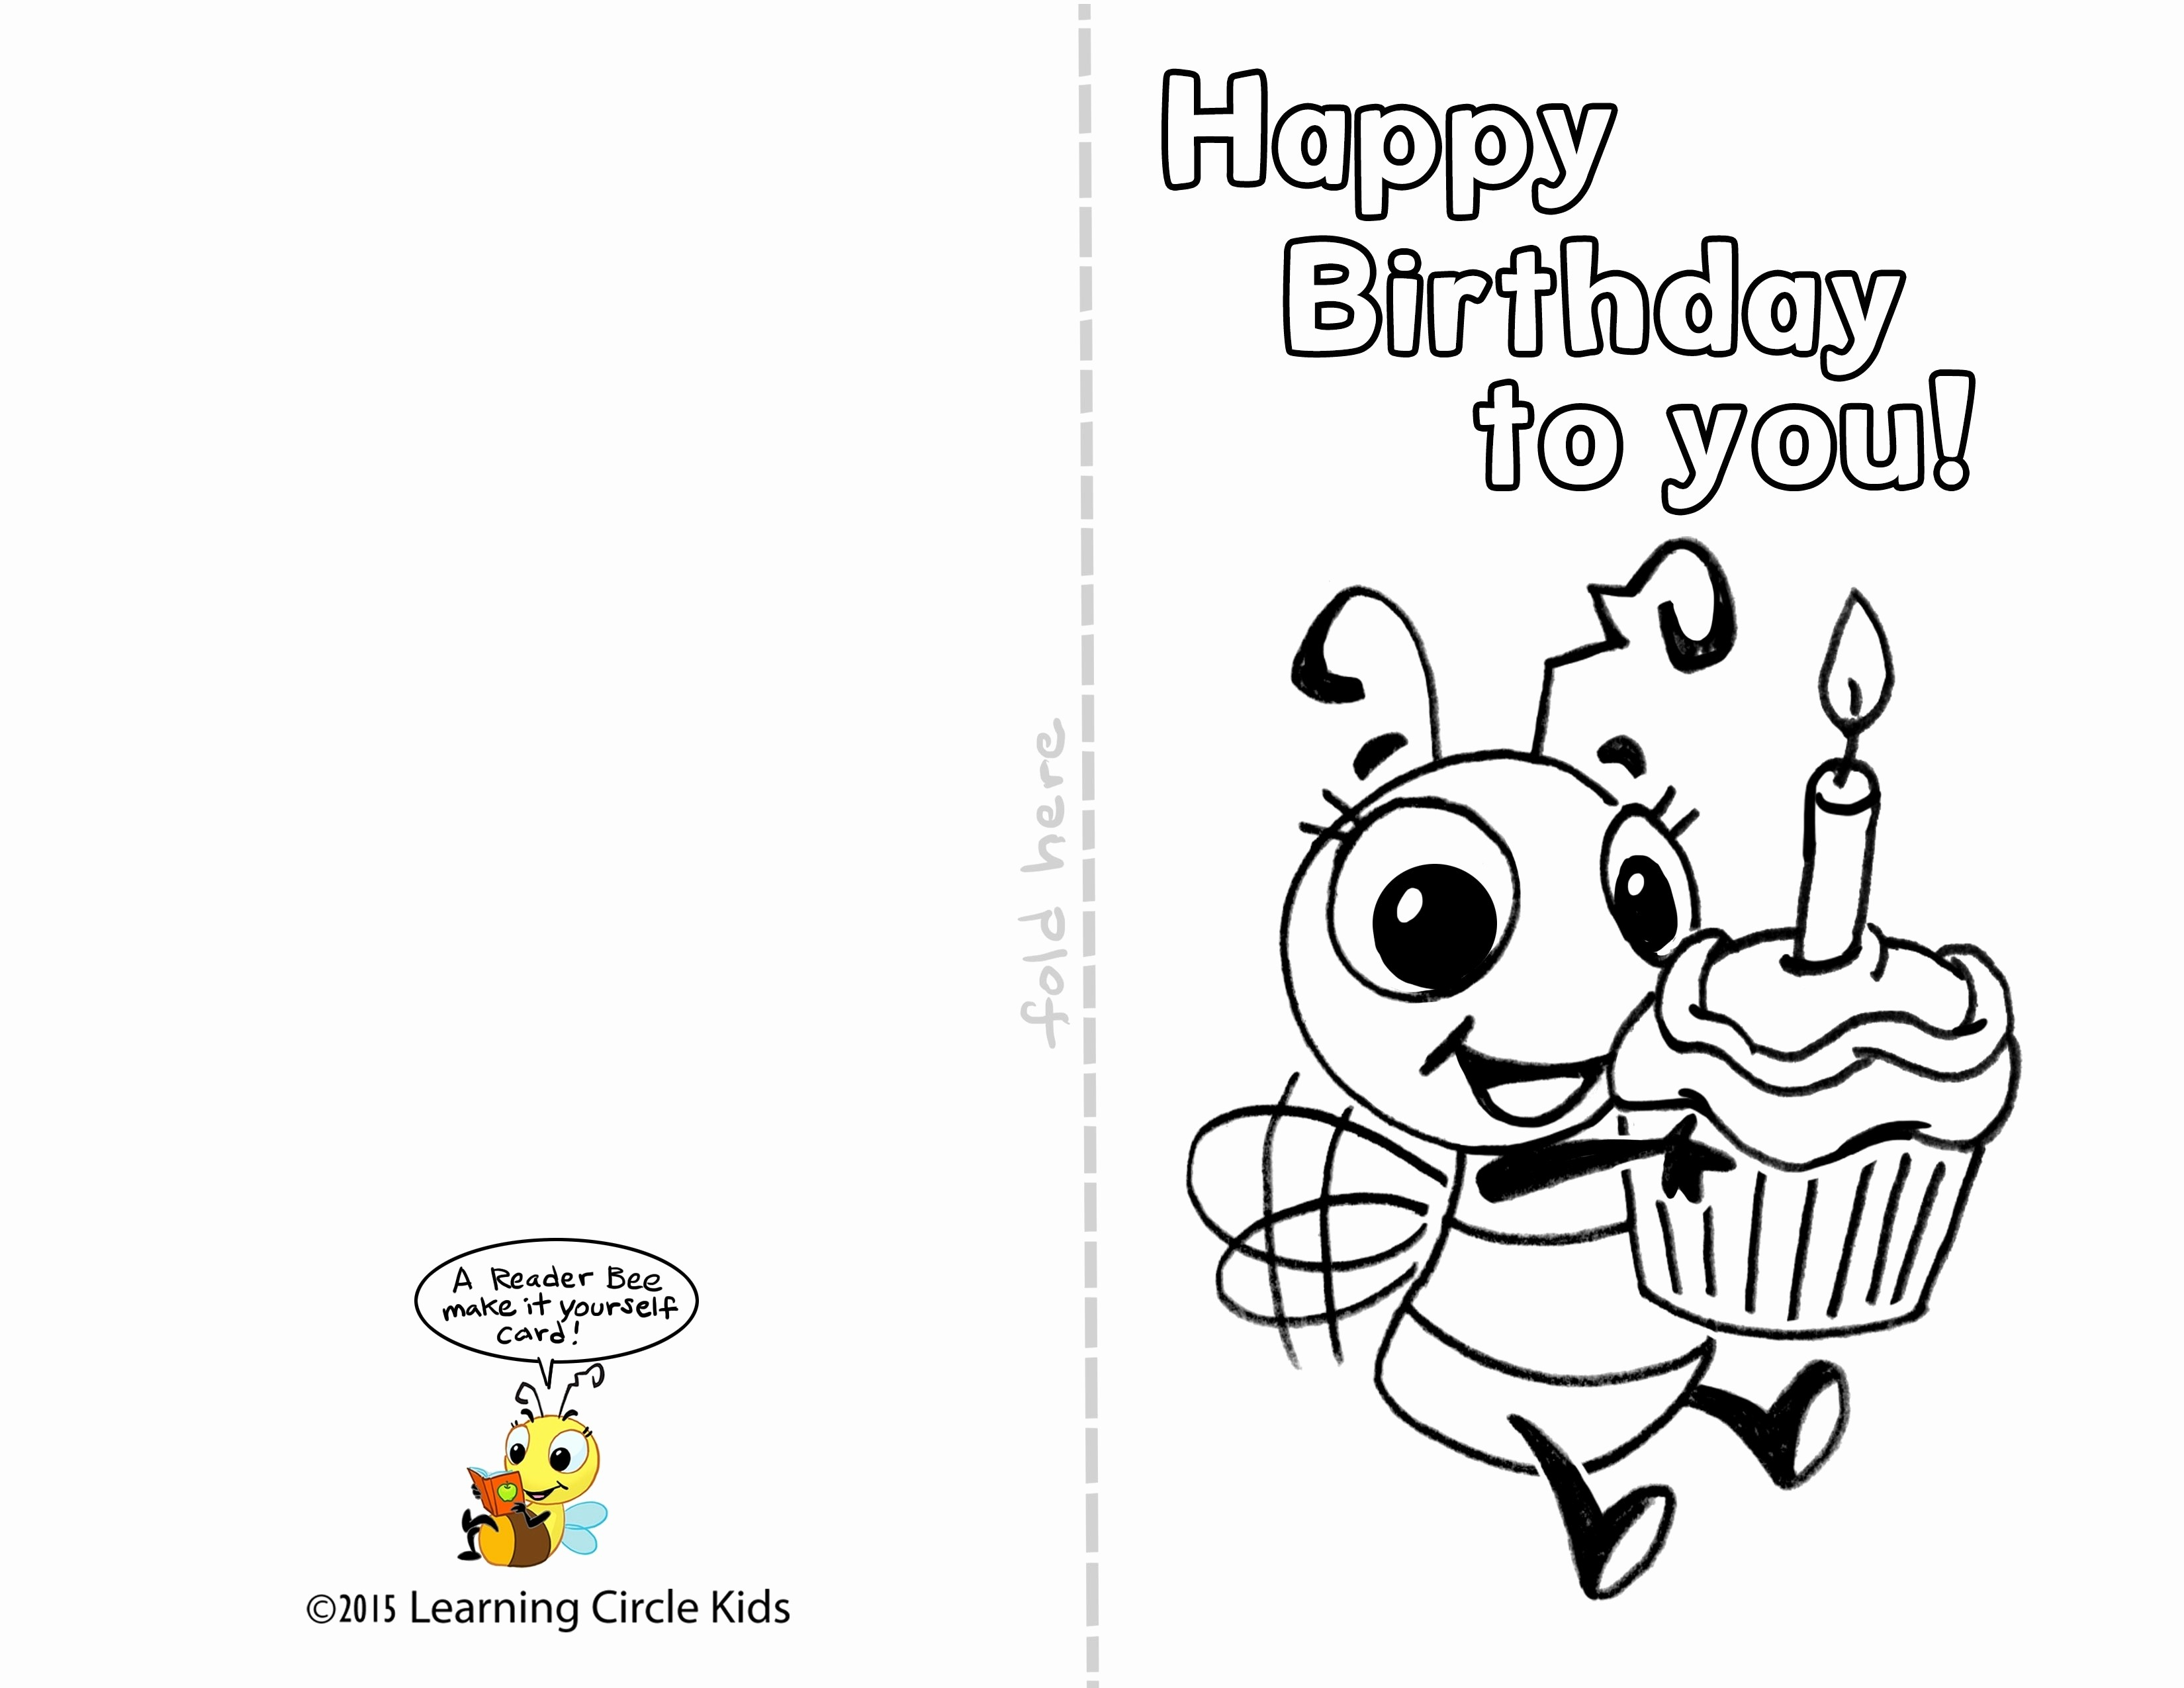 Free Printable Birthday Card Refrence Printable Birthday Cards For - Free Printable Birthday Cards For Wife